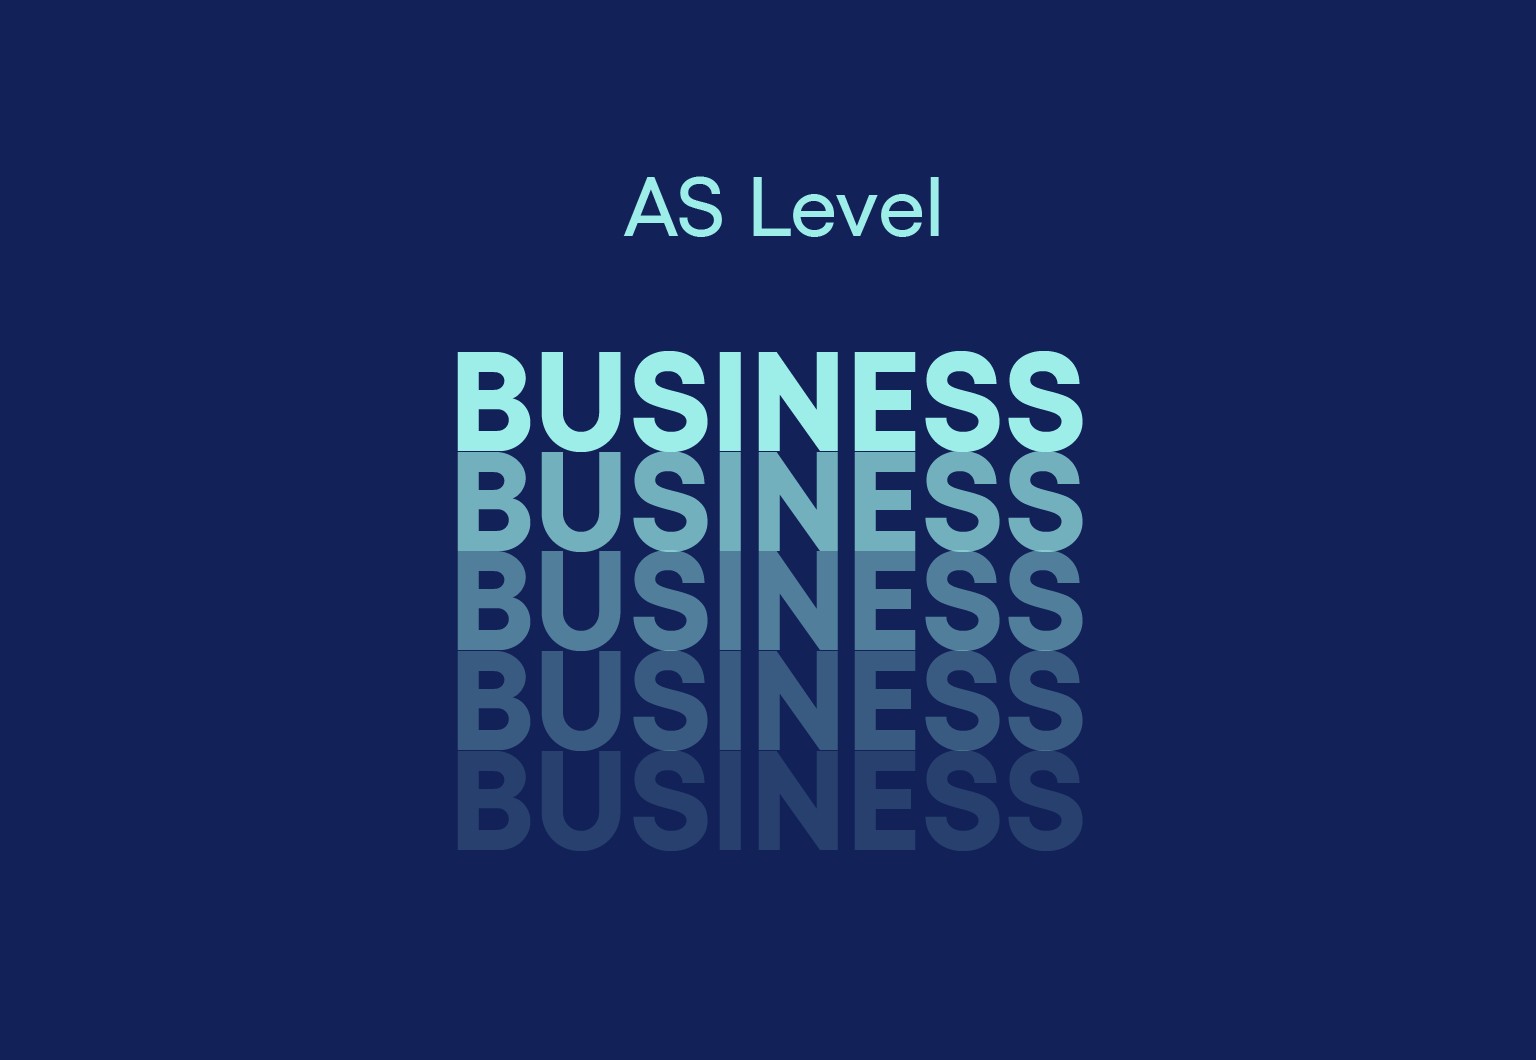 AS Level Business